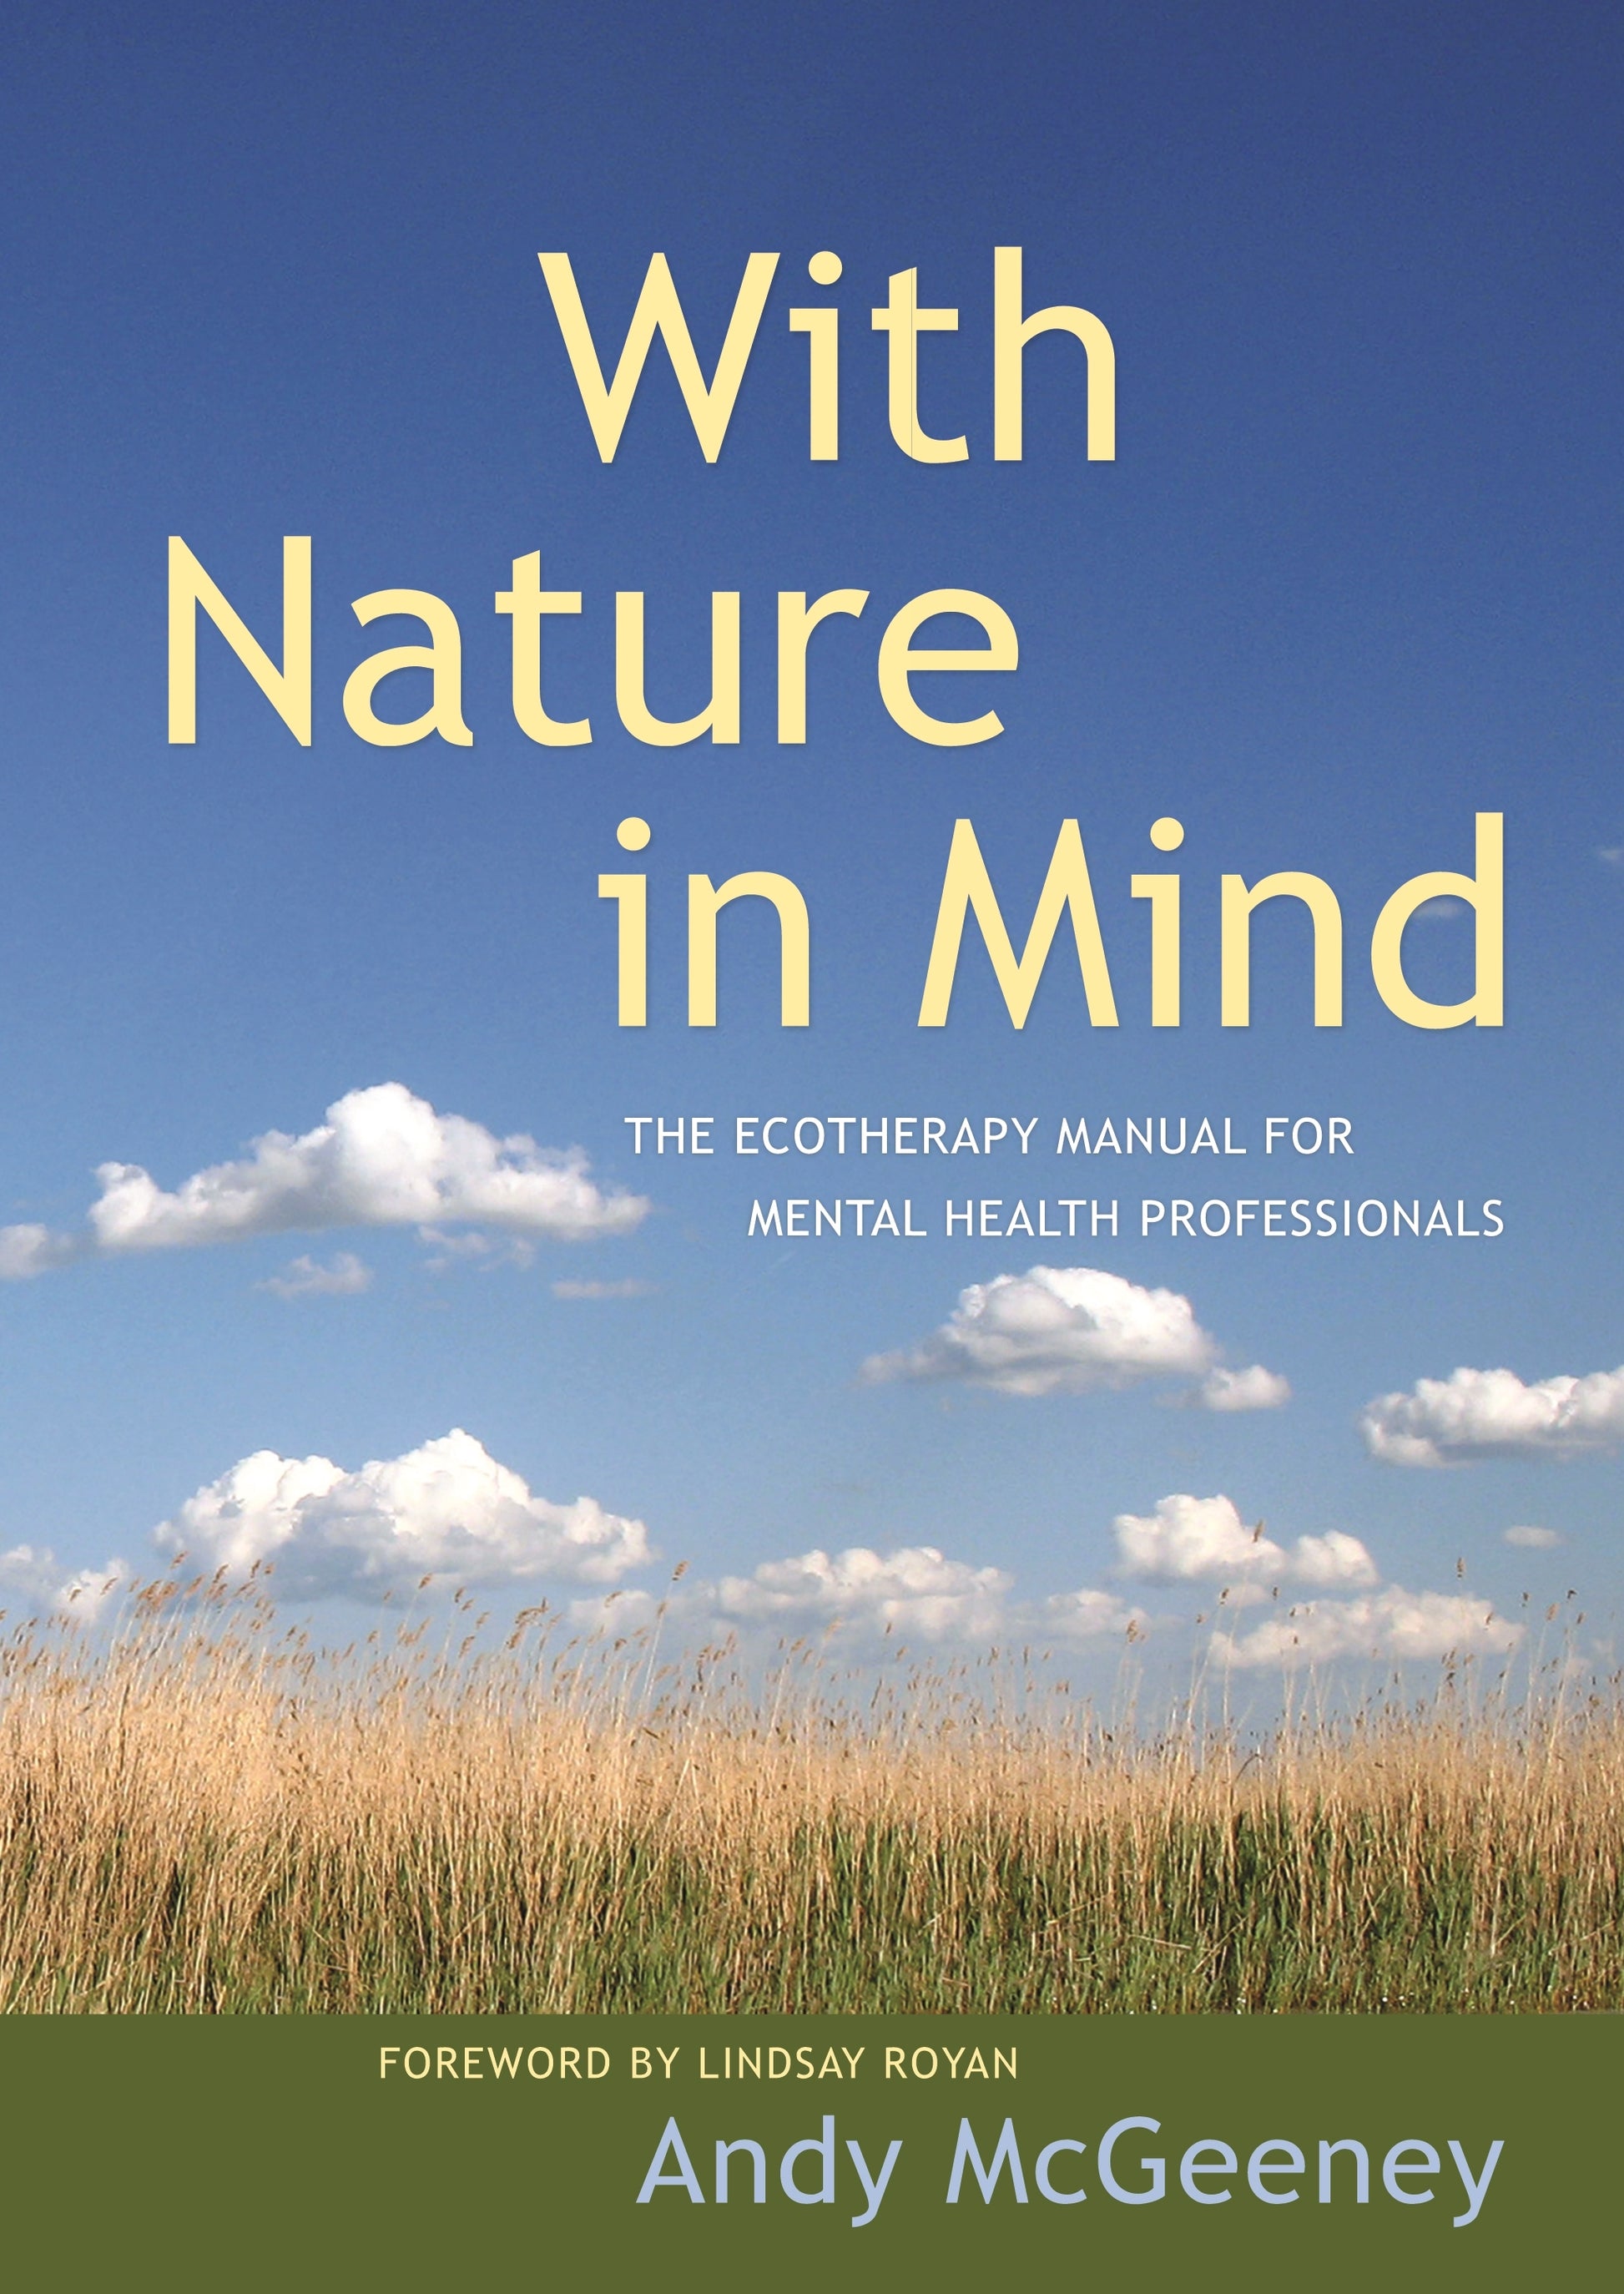 With Nature in Mind by Andy McGeeney, Lindsay Royan